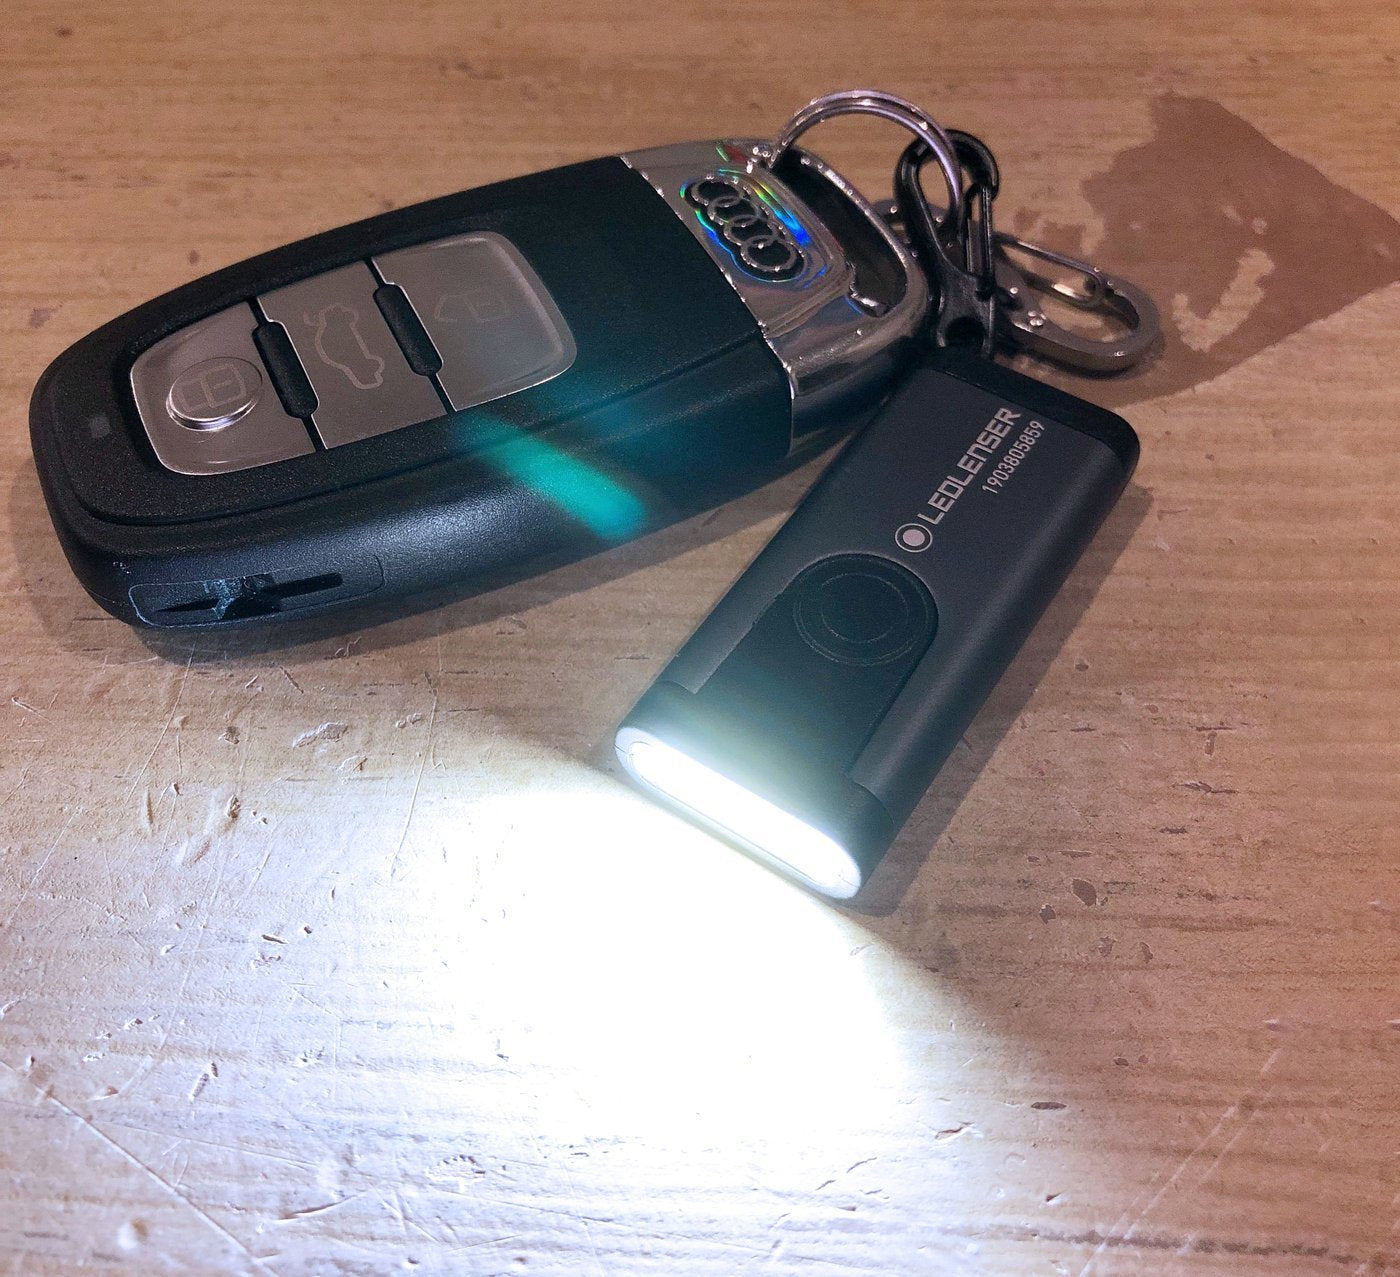 K4R Rechargeable Key Ring Lamp